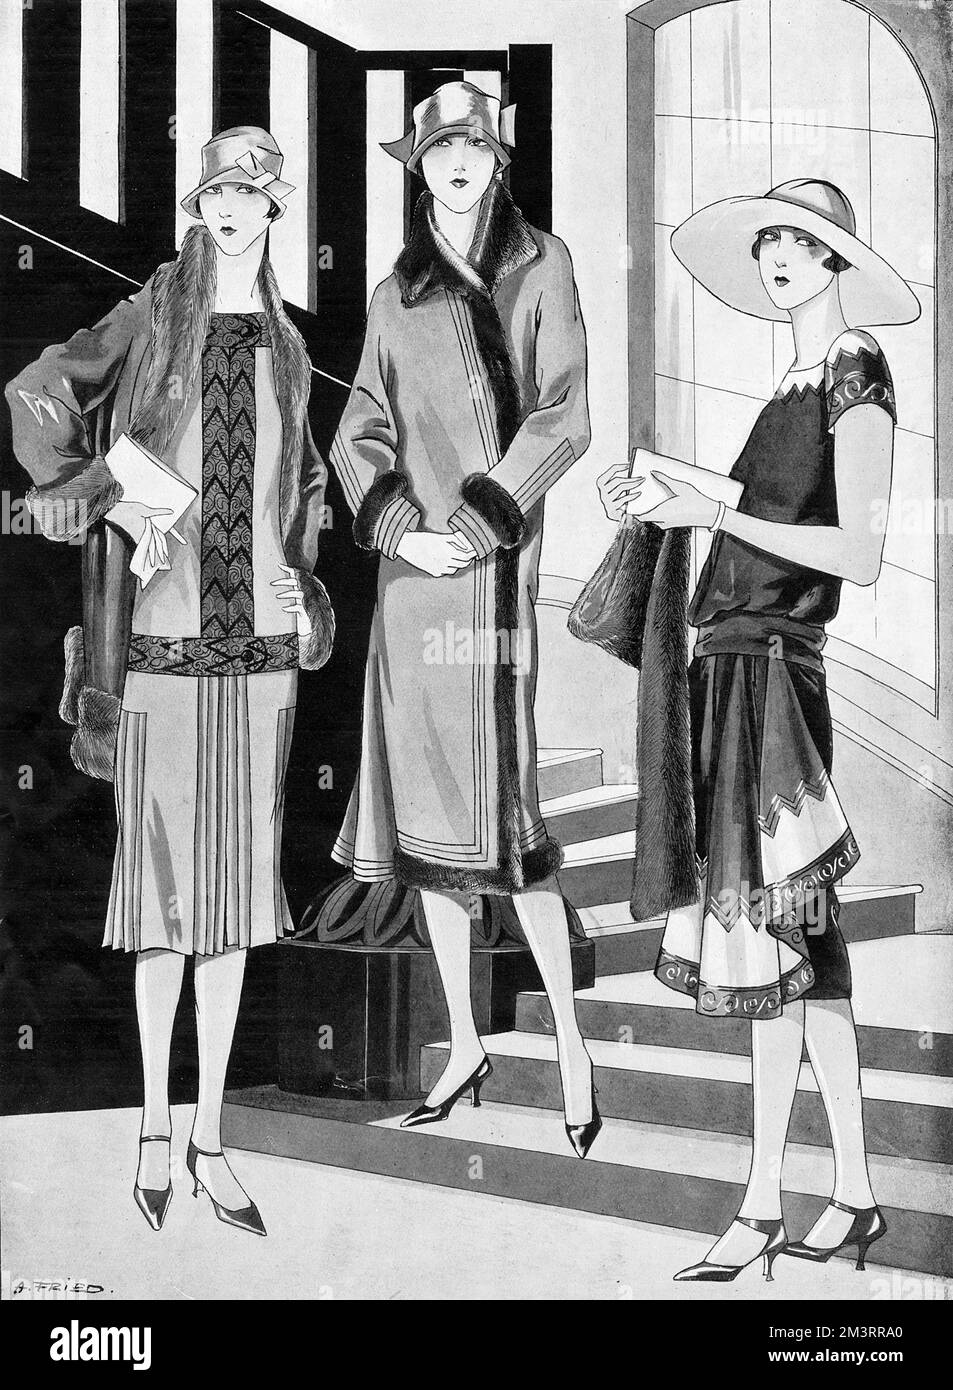 A trio of chic outfits seen on the Riviera.  From left, a jumper suit in lavender hasha worn with a coat of darker tone trimmed with grey fox.  Next, a fur trimmed velvet wrap worn with a smart little hat with a high draped crown.  On the right, an afternoon frock of navy blue crepe birman.  White georgette embroidered with gold outlines the neck and apron effect of the skirt.       Date: 1925 Stock Photo